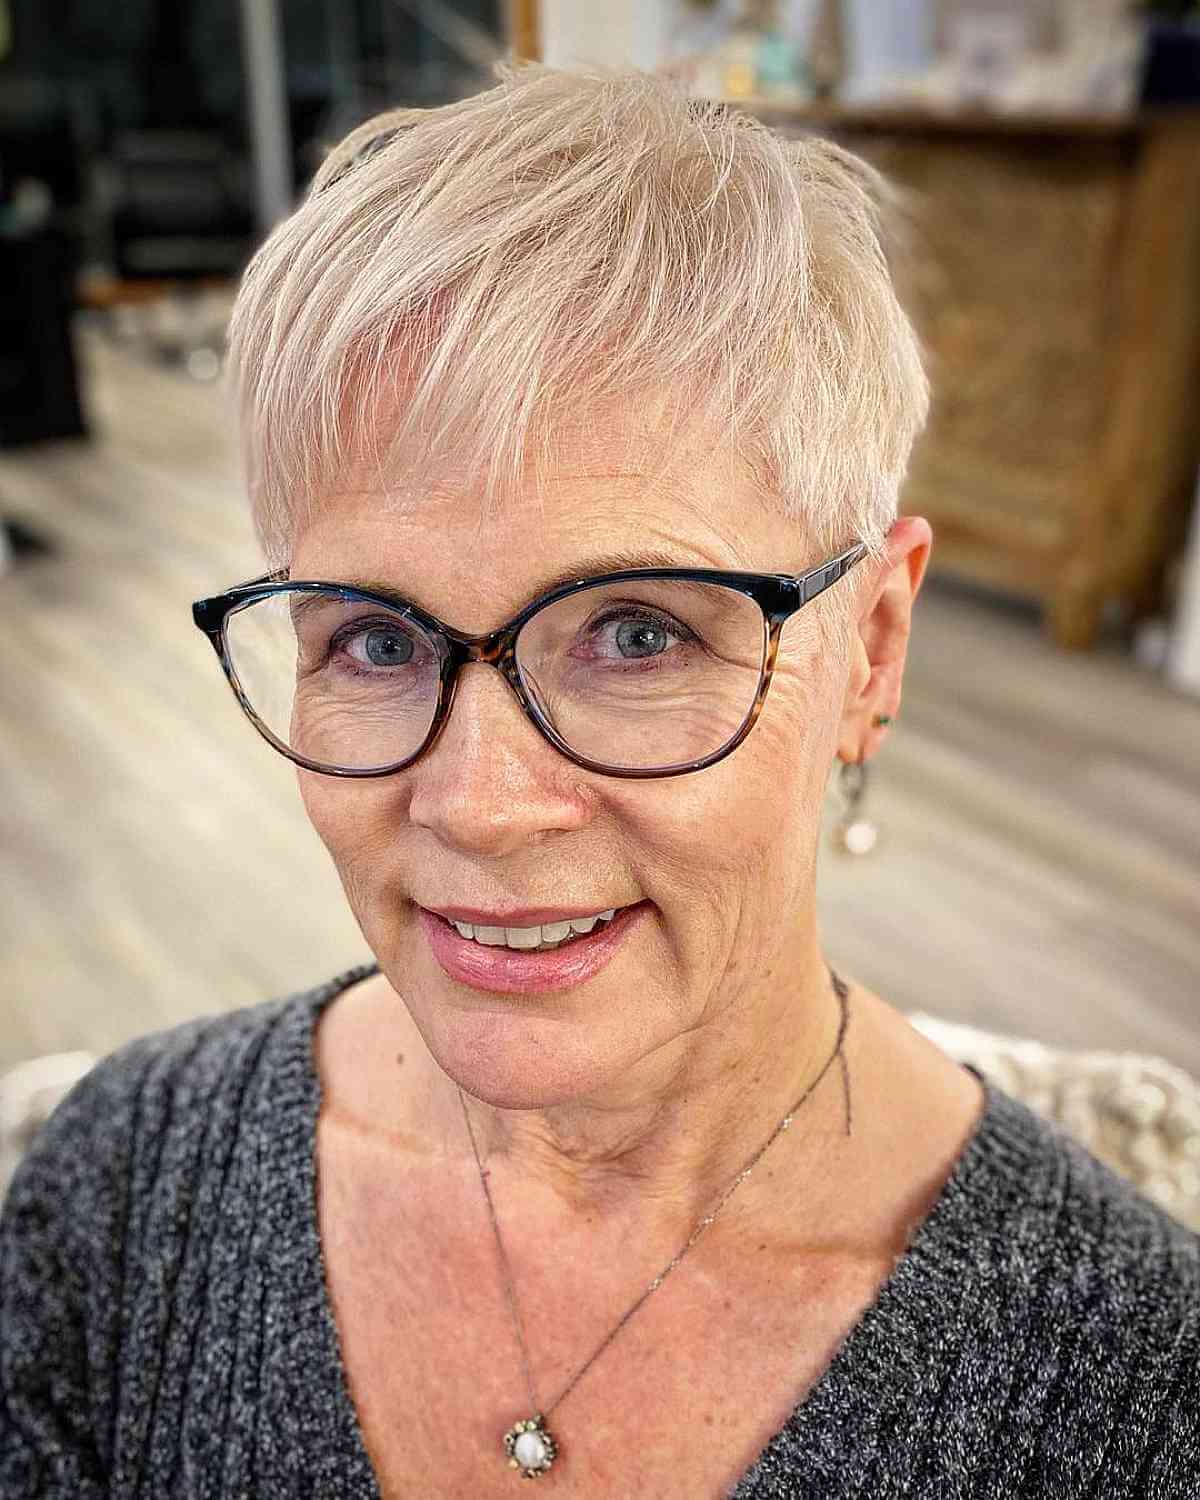 Younger looking pixie crop with bangs for women in their 50s with glasses